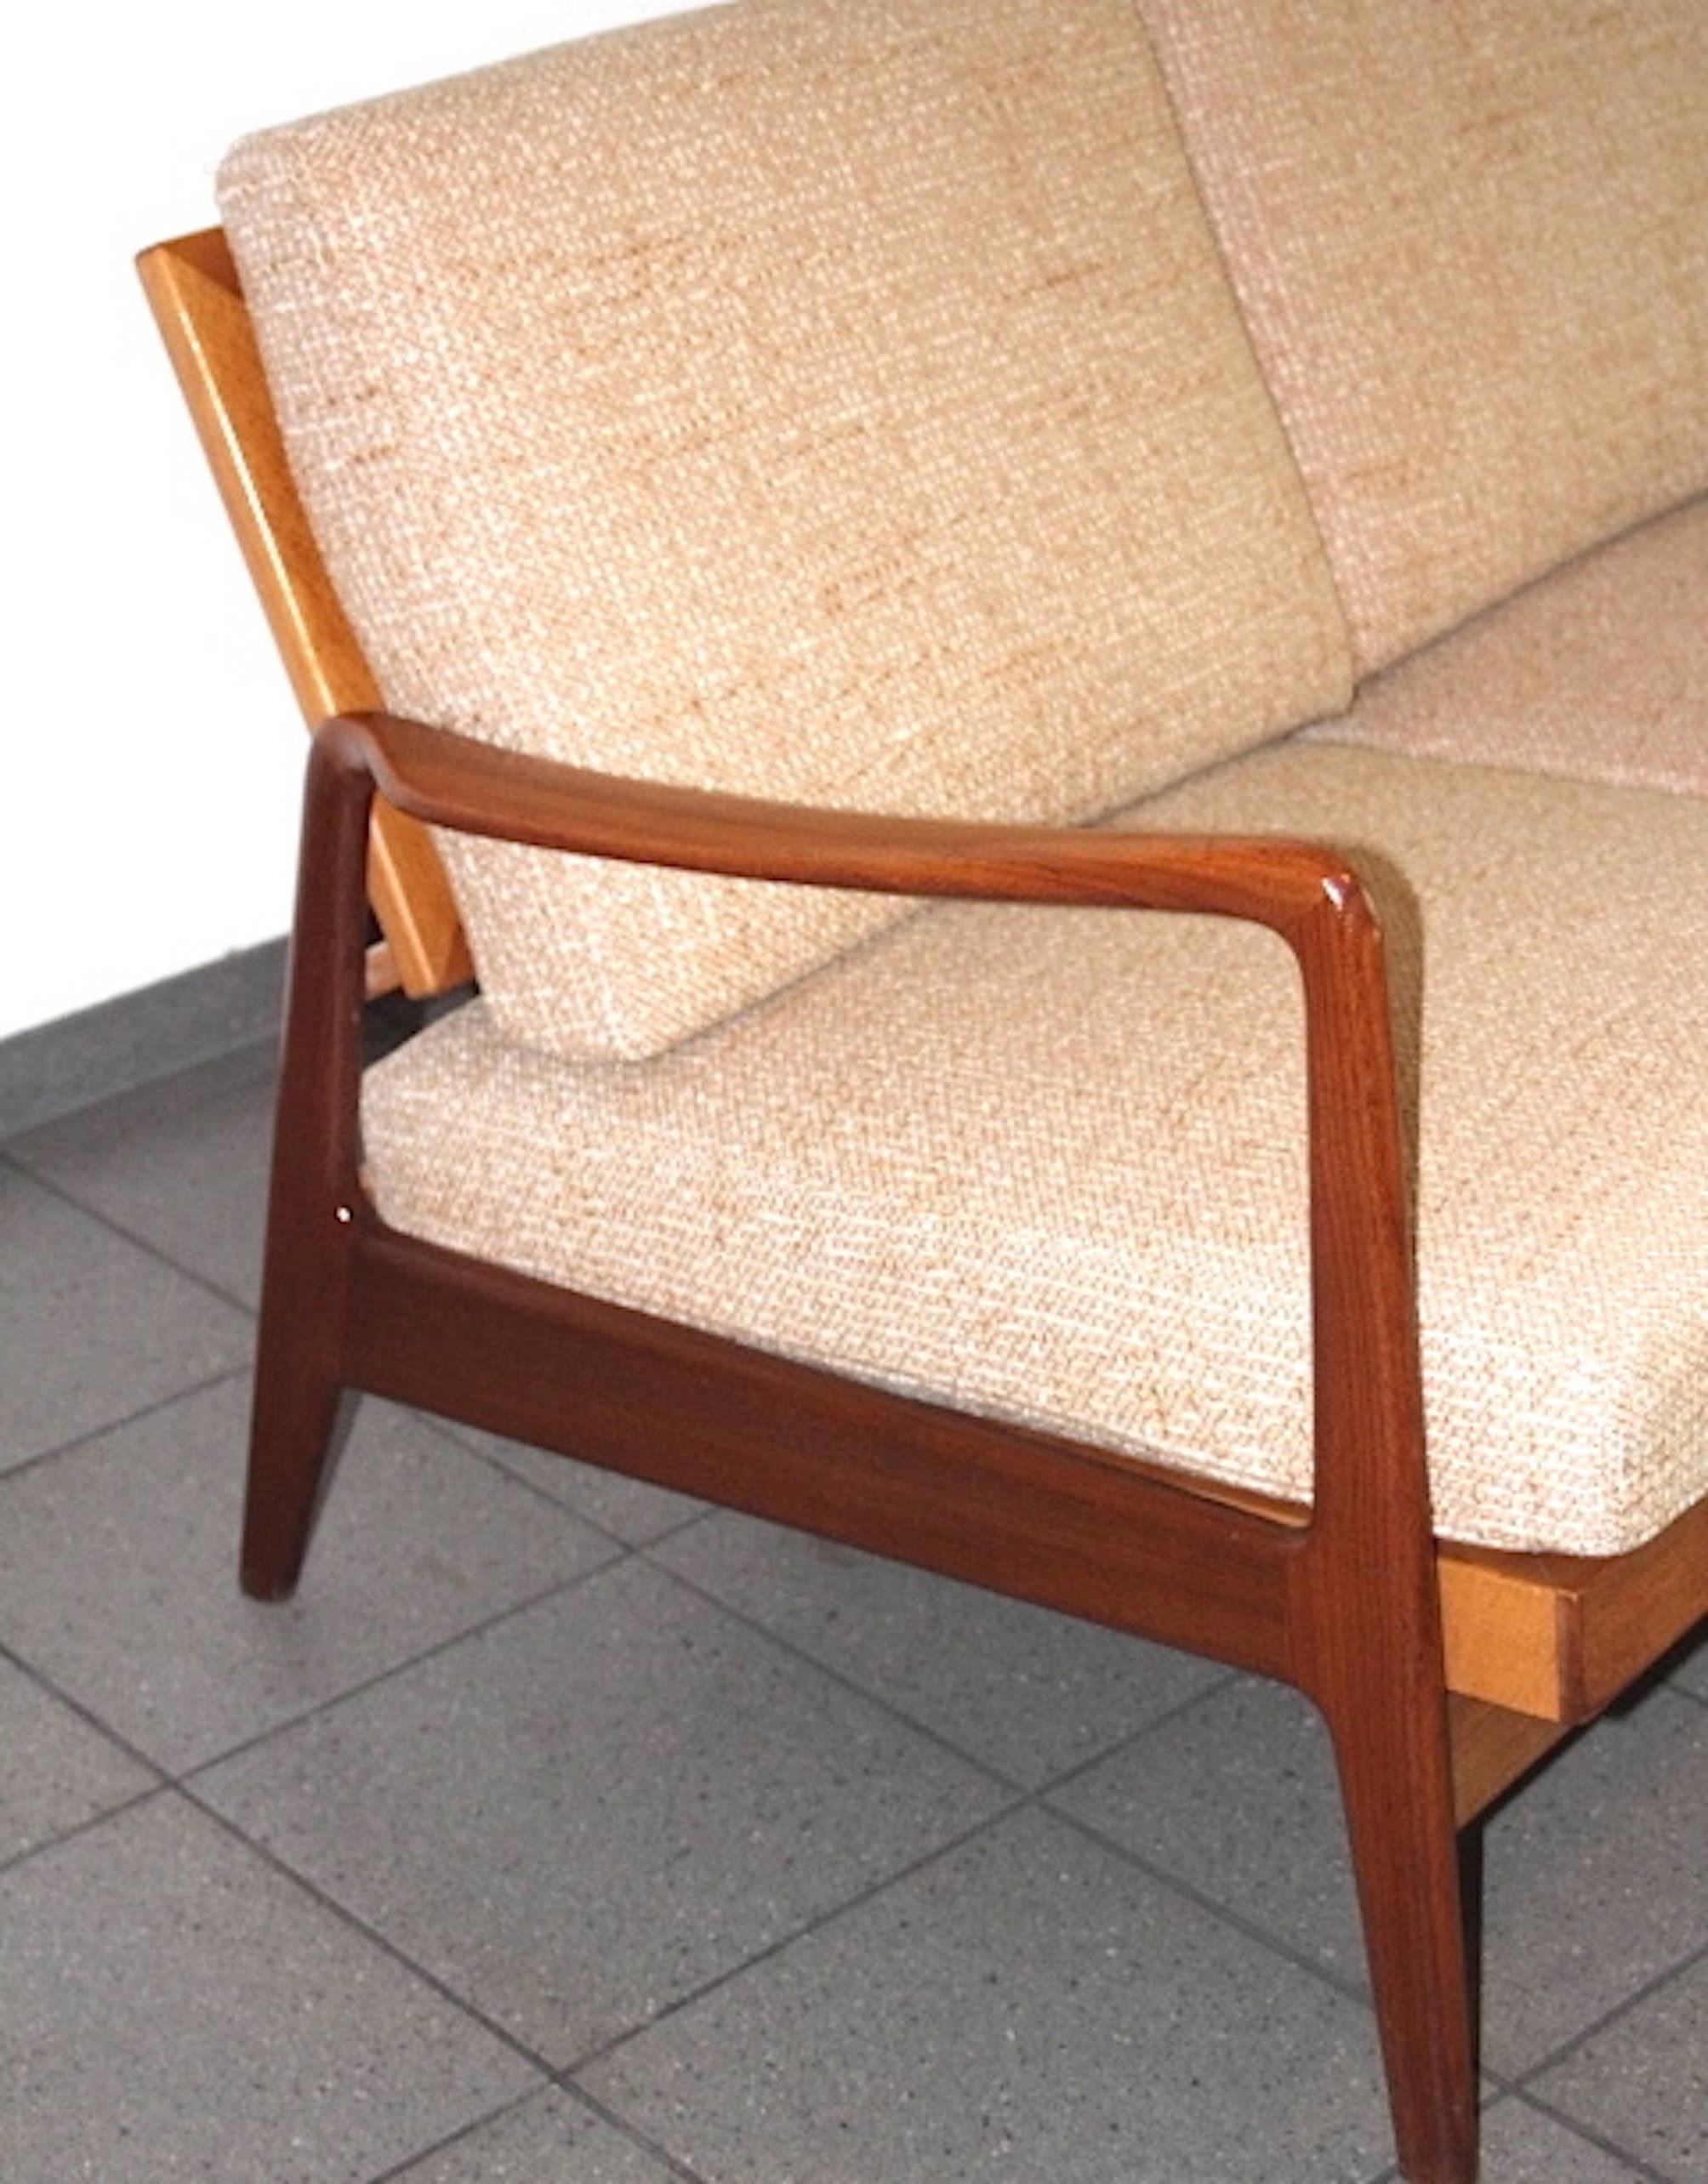 Danish Mid-Century Three-Seat Teak Sofa and Daybed from 1960s For Sale 2